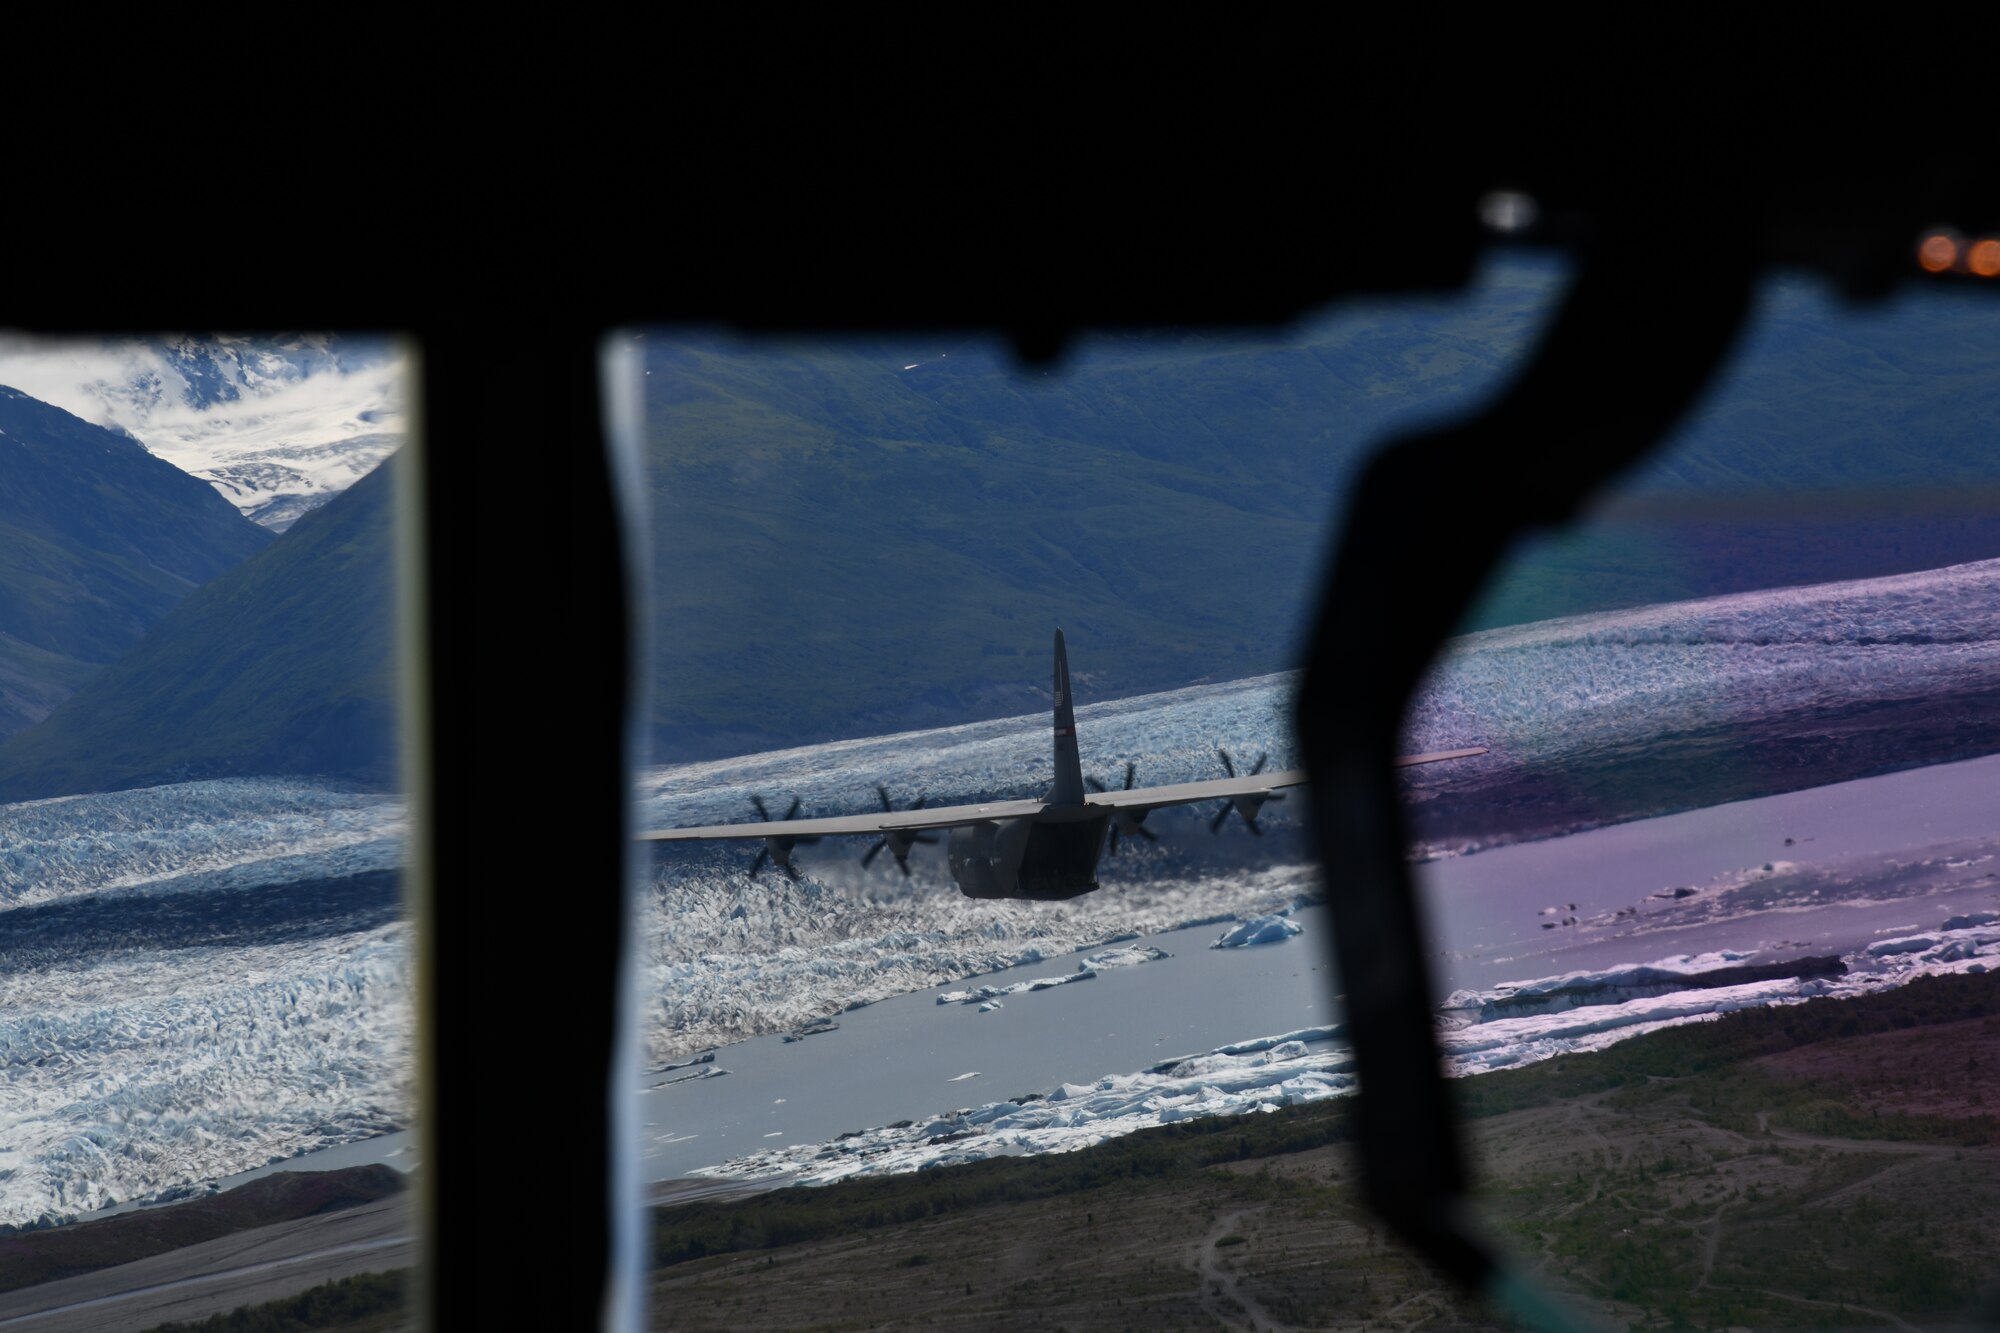 Pilots and loadmasters of the 815th Airlift Squadron conduct low-level tactical flight training patterns during a training exercise at Joint Base Elmendorf-Richardson, Alaska, July 13-16, 2021. The terrain of the mountain, valleys and along with the colder temperatures provided a different challenge for the low-level flights, which were an effective tactic in training for hostile environments. (U.S. Air Force photo by Master Sgt. Jessica Kendziorek)